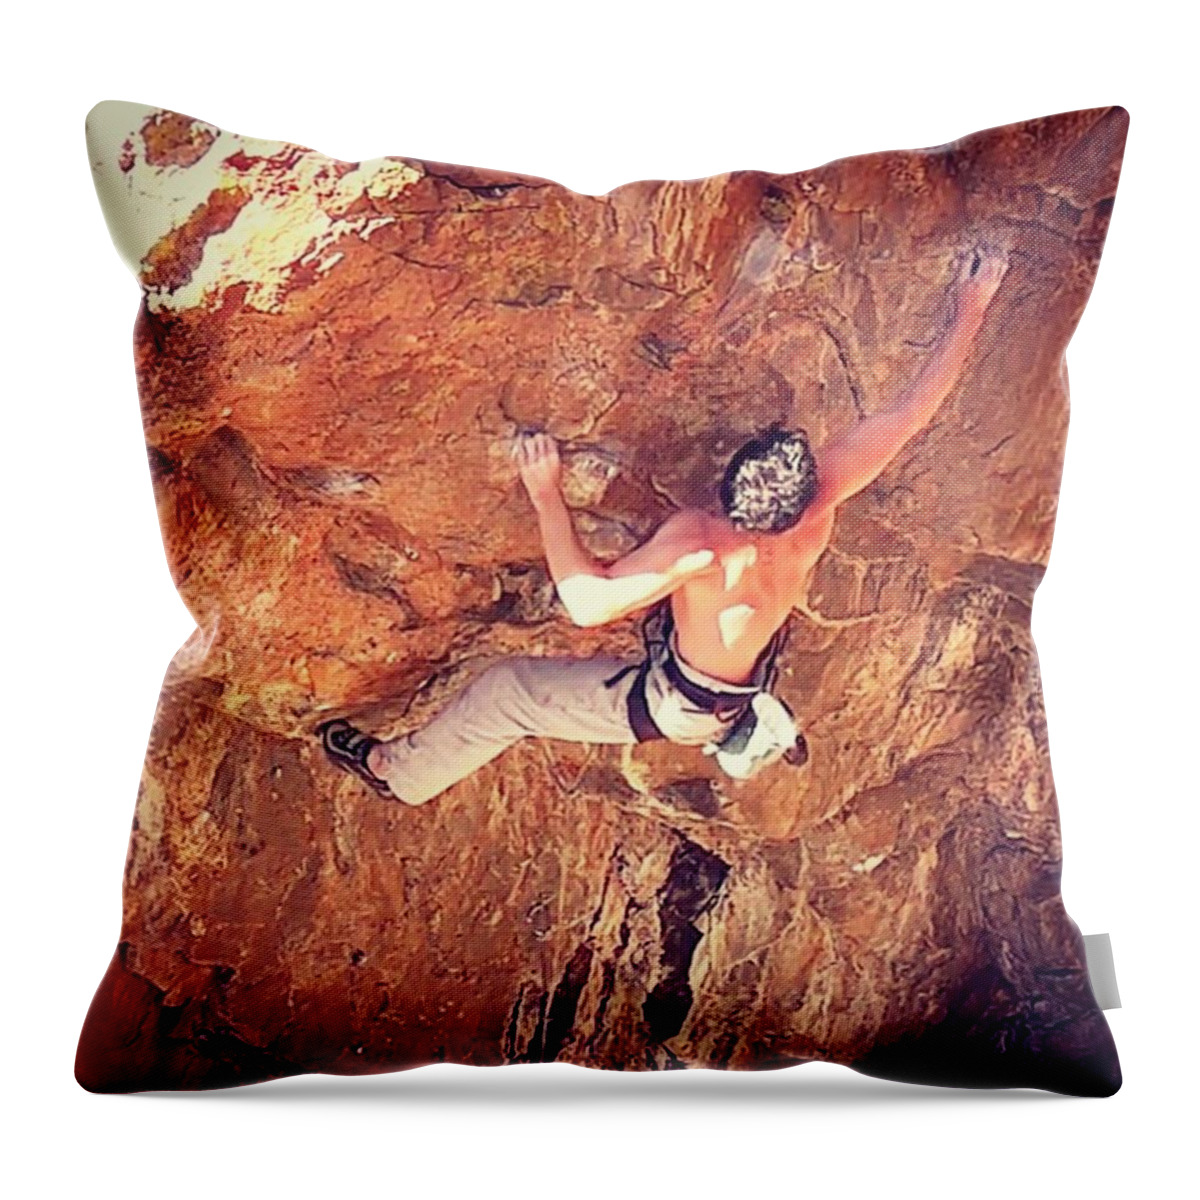 Flowstate Throw Pillow featuring the photograph Project by Noah Kaufman